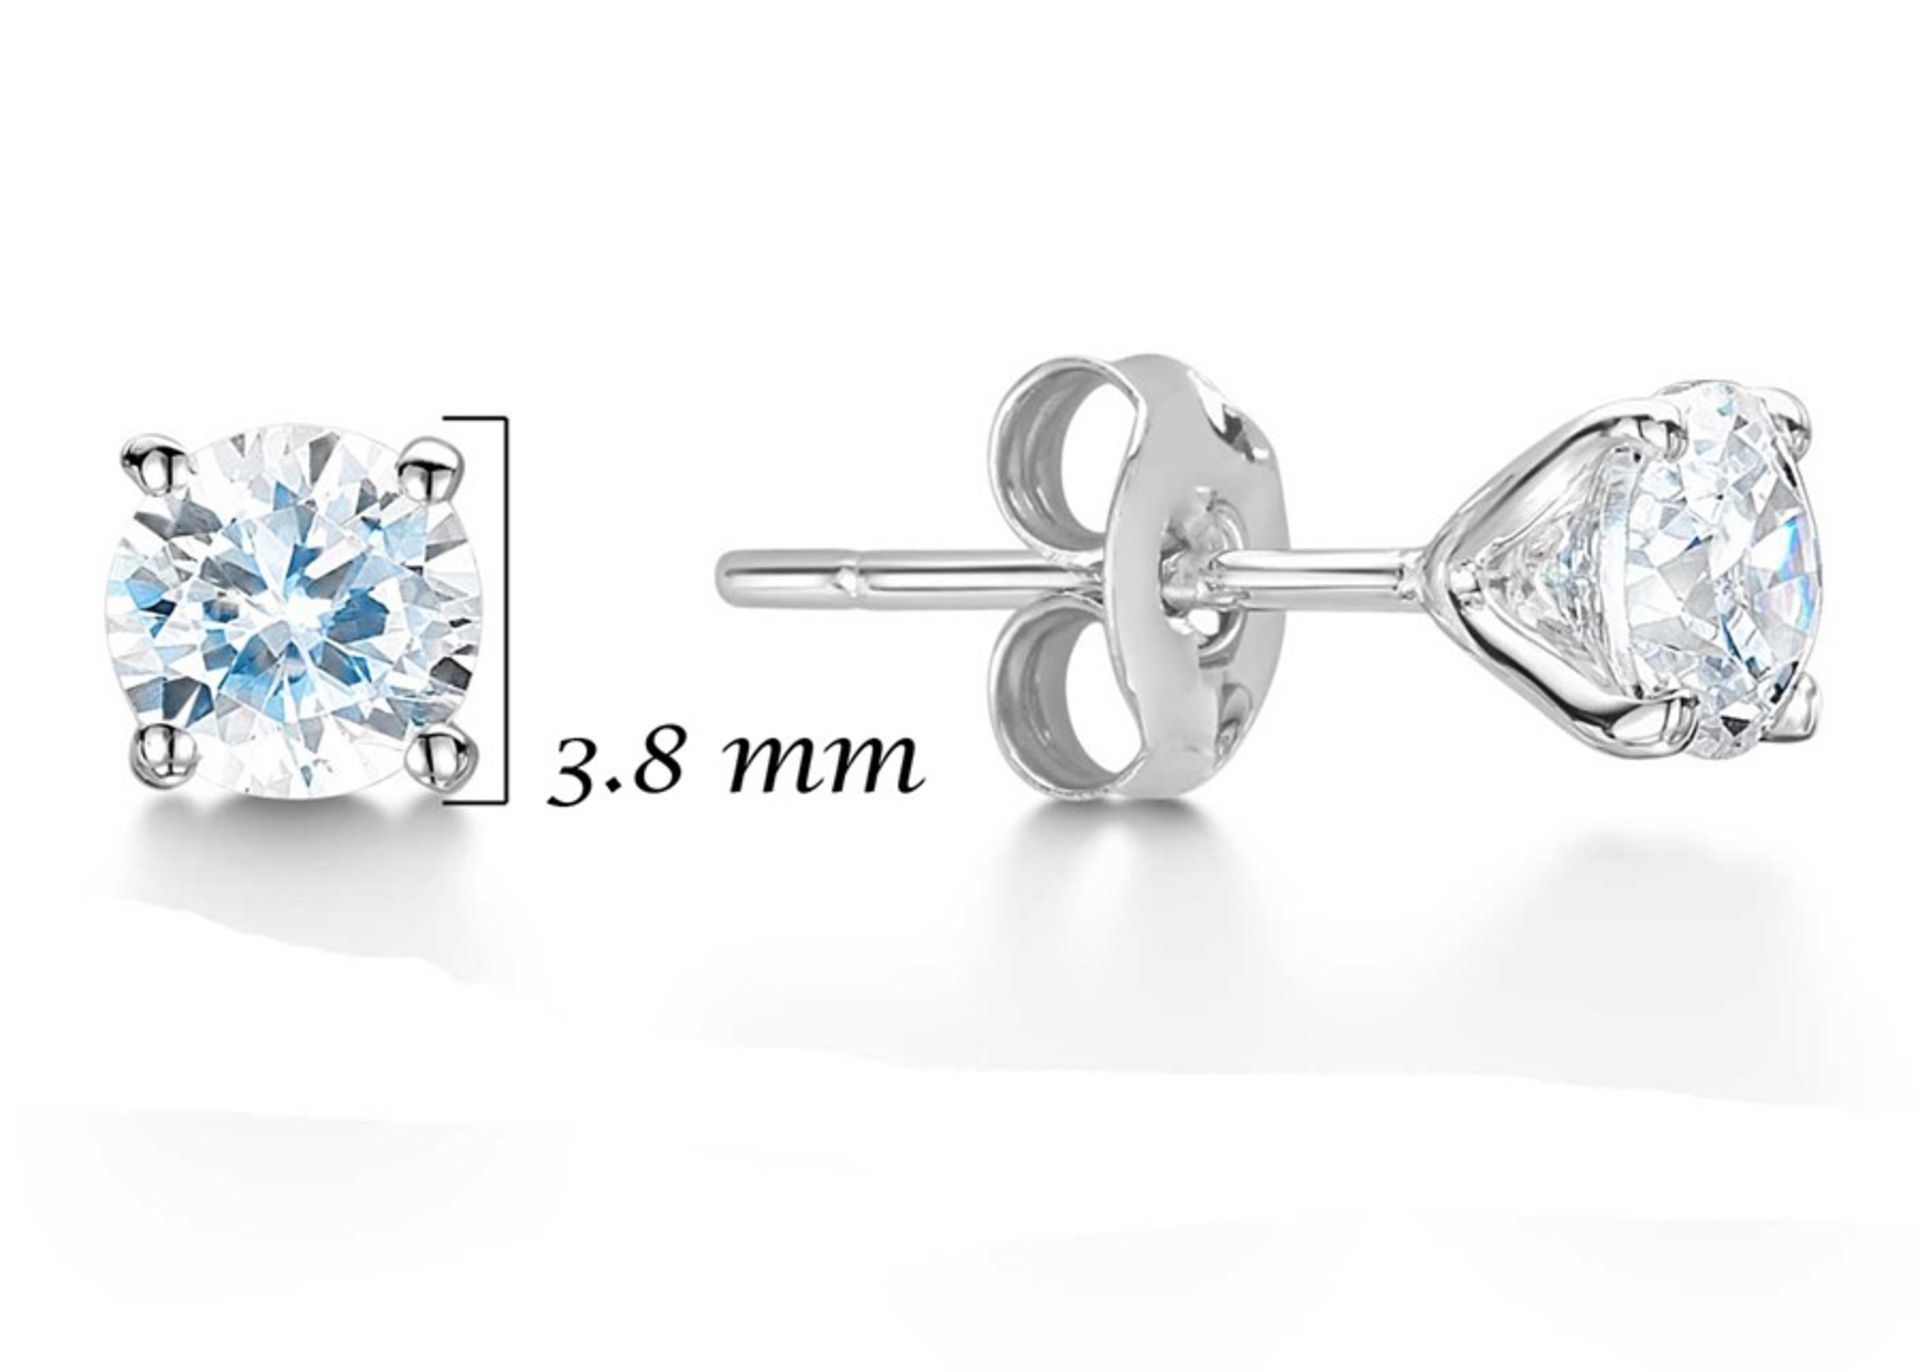 Valued by GIE £3,020.00 - 9ct White Gold Four Claw Set Diamond Earring 0.25 Carats - 8203003, - Image 3 of 4